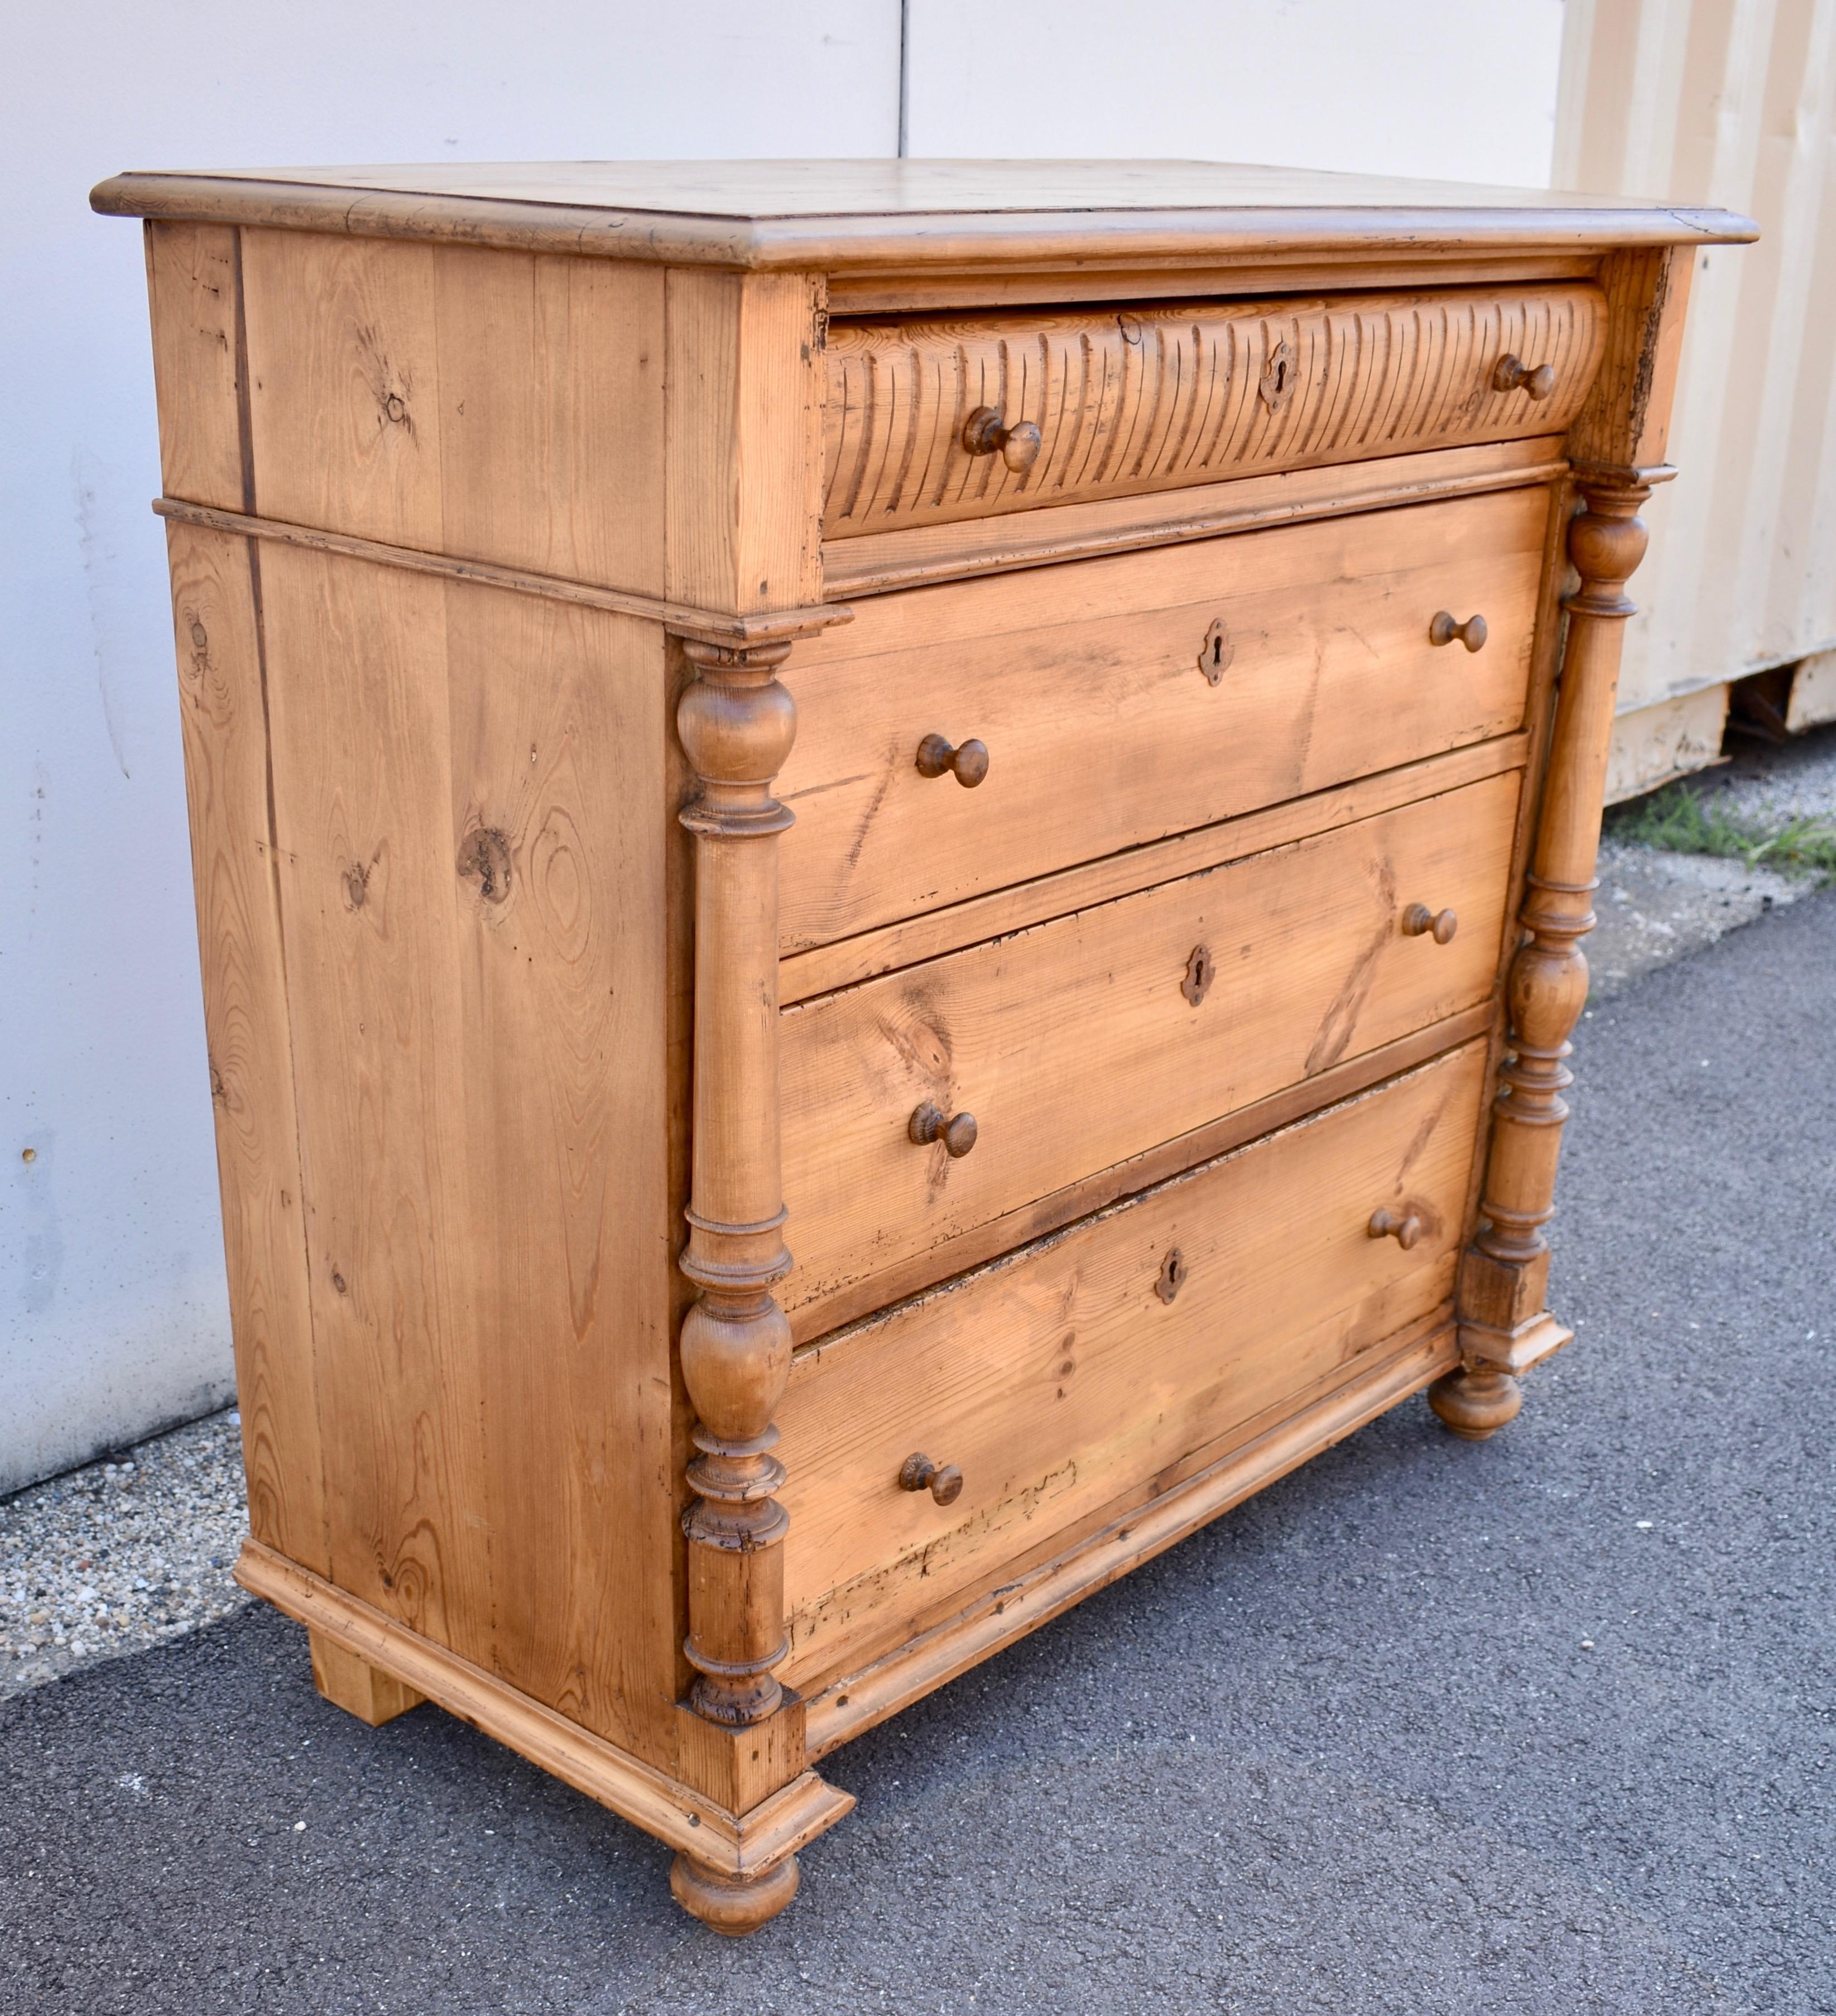 What an attractive chest of drawers and what beautiful hand-cut dovetailed and pegged construction.  The case has a step-down edge to the top, which is attached to the sides with hardwood pegs.  The front corners are adorned with full turned columns